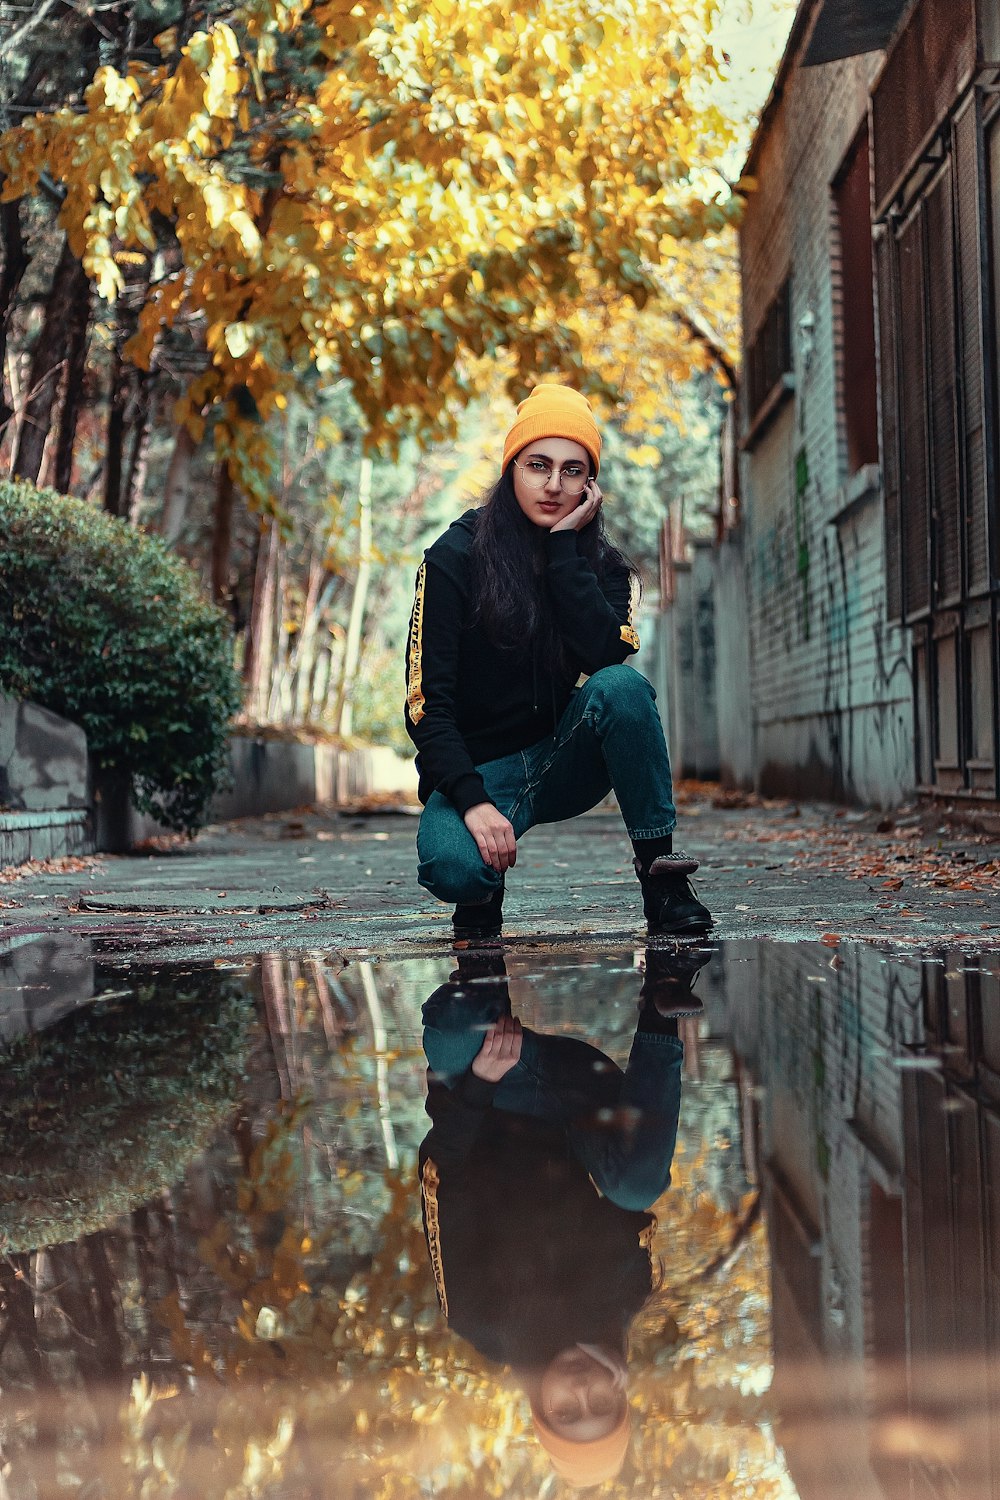 woman in black jacket, yellow beanie hat, and blue jeans kneeling on ground